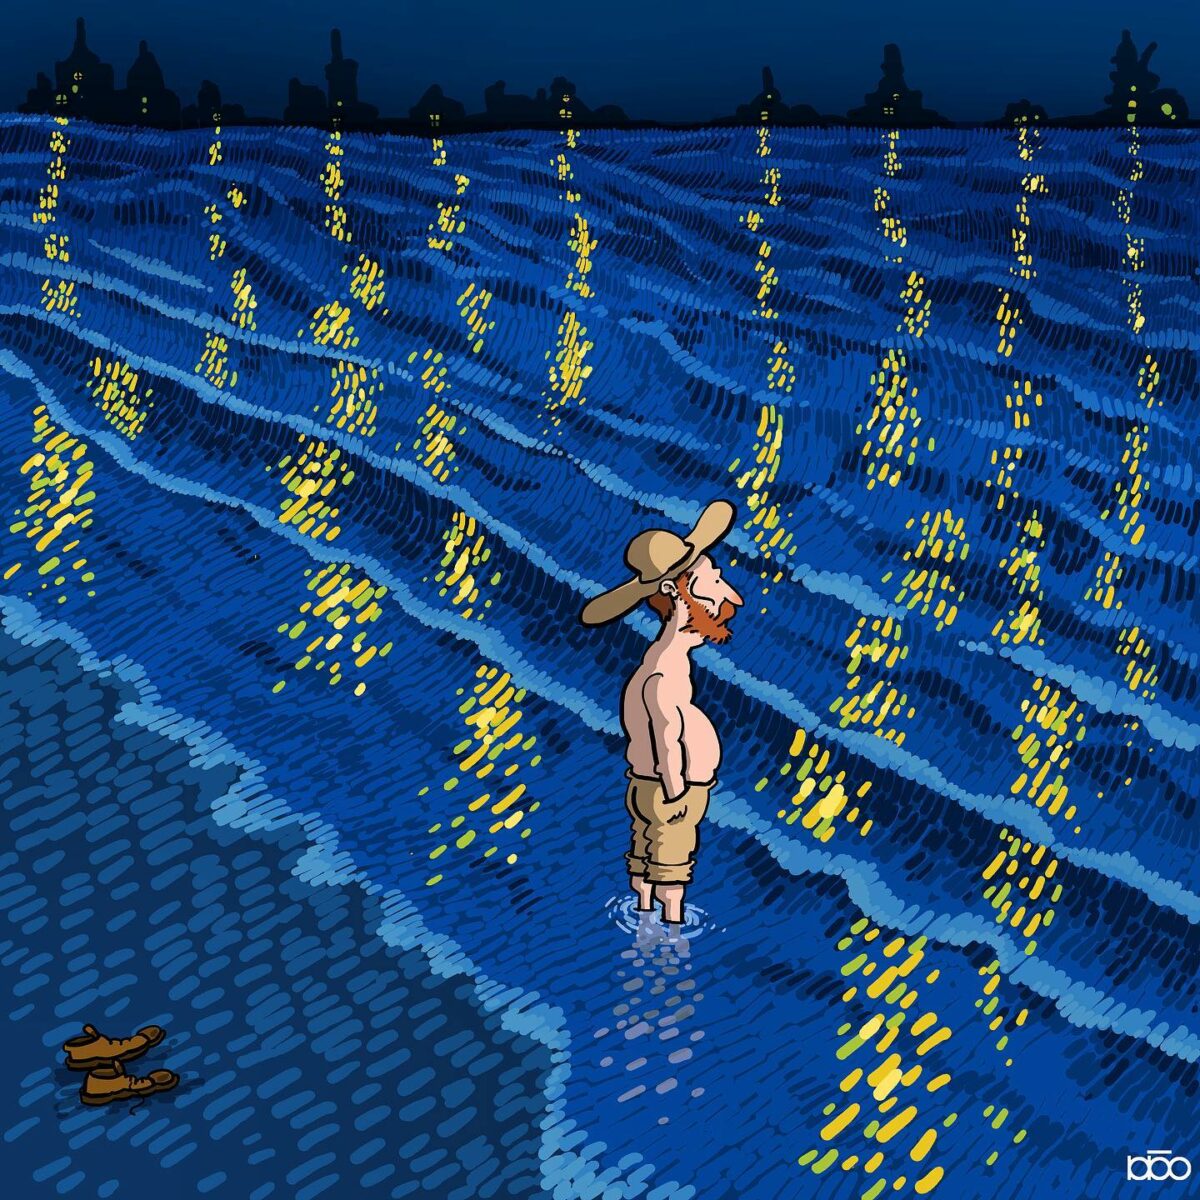 Vincent Van Goghs Life Recreated In His Own Art Style By Alireza Karimi Moghaddam 24